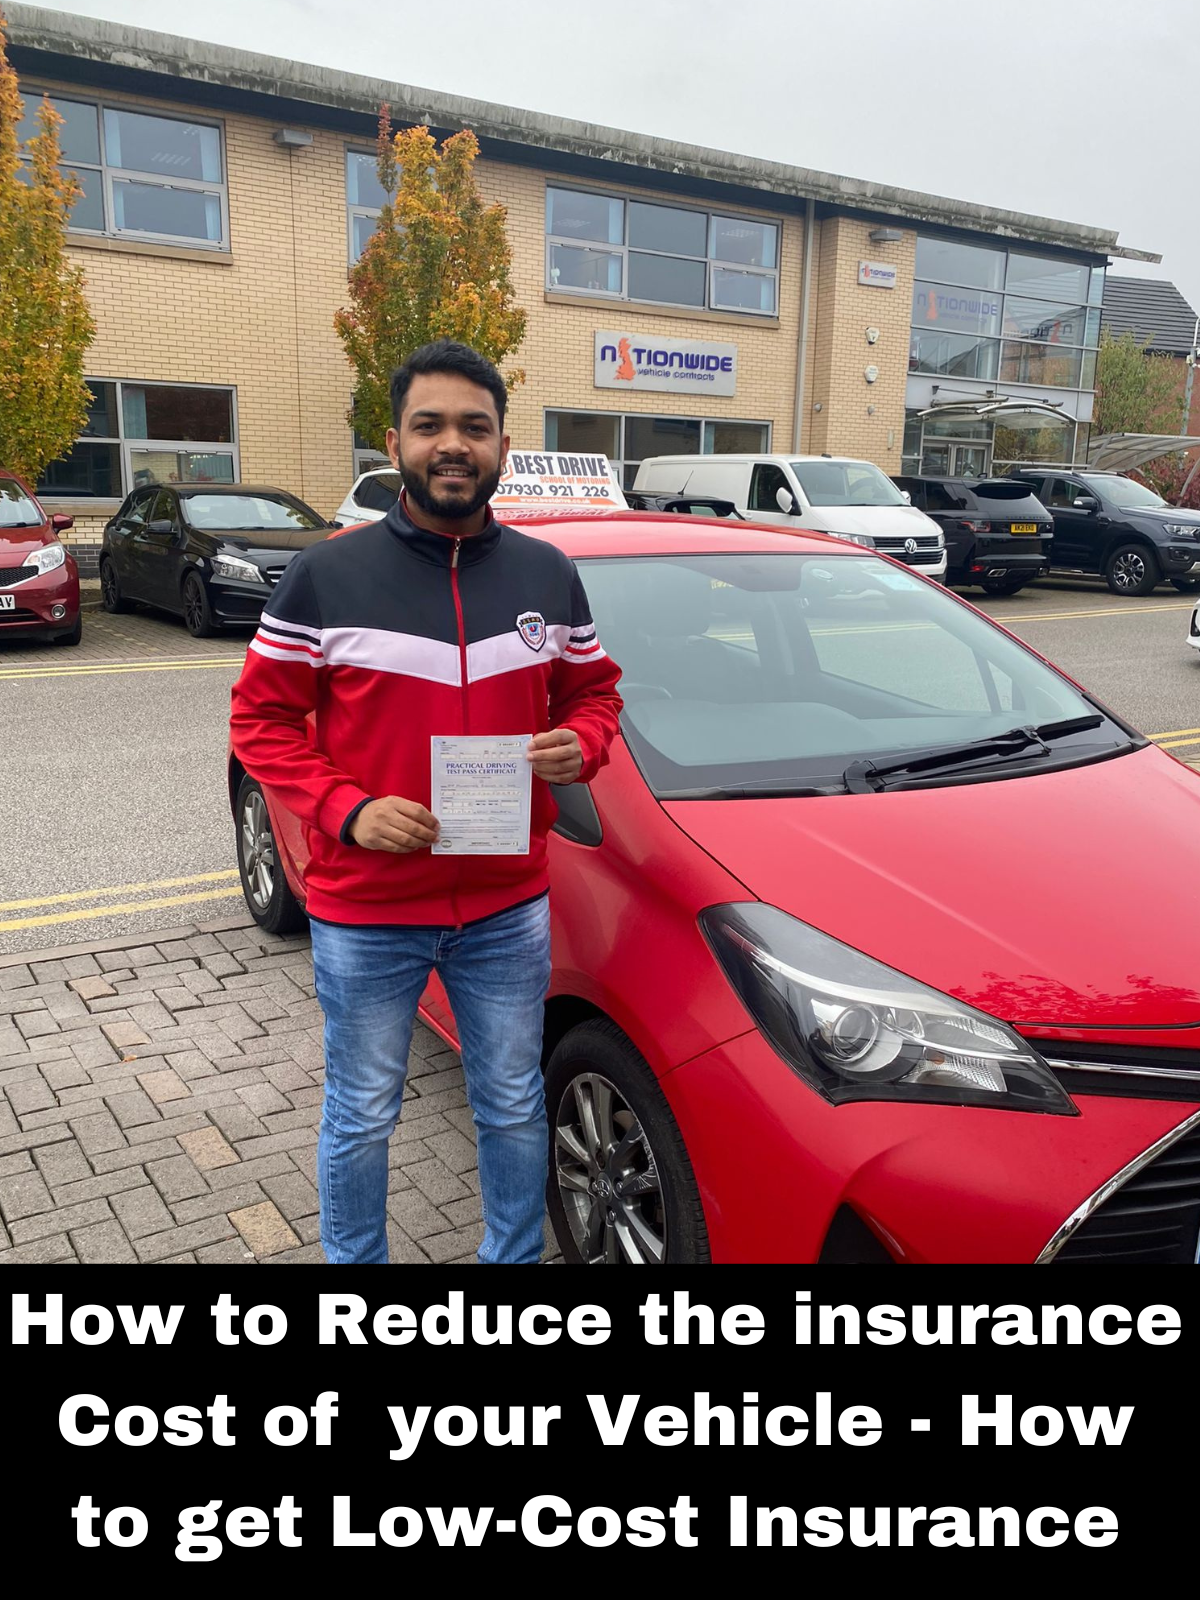 How to Reduce the insurance Cost of your Vehicle - How to get Low-Cost Insurance